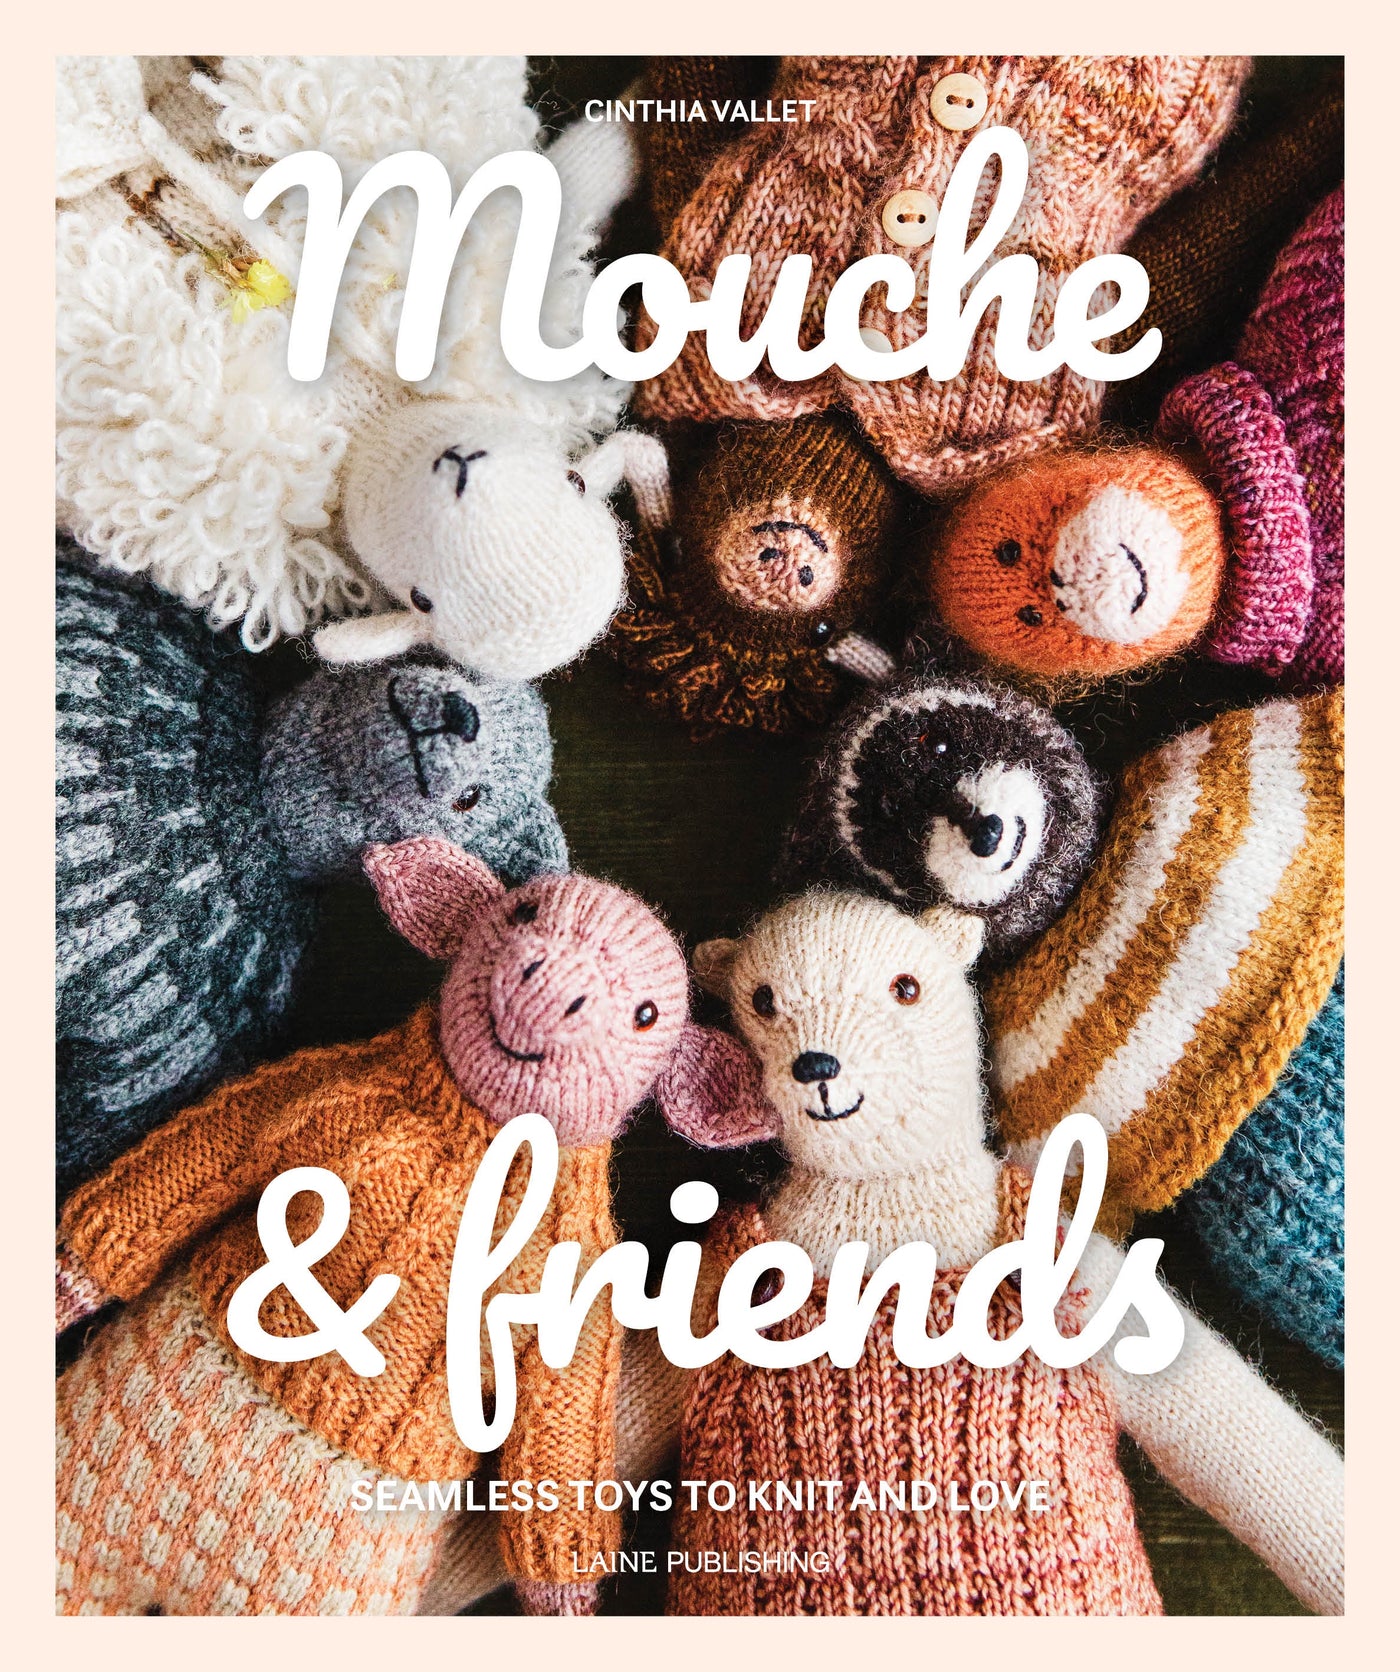 Mouche and Friends: Seamless Toys to Knit and Love by Cinthia Vallet (Cinthia Vallet)